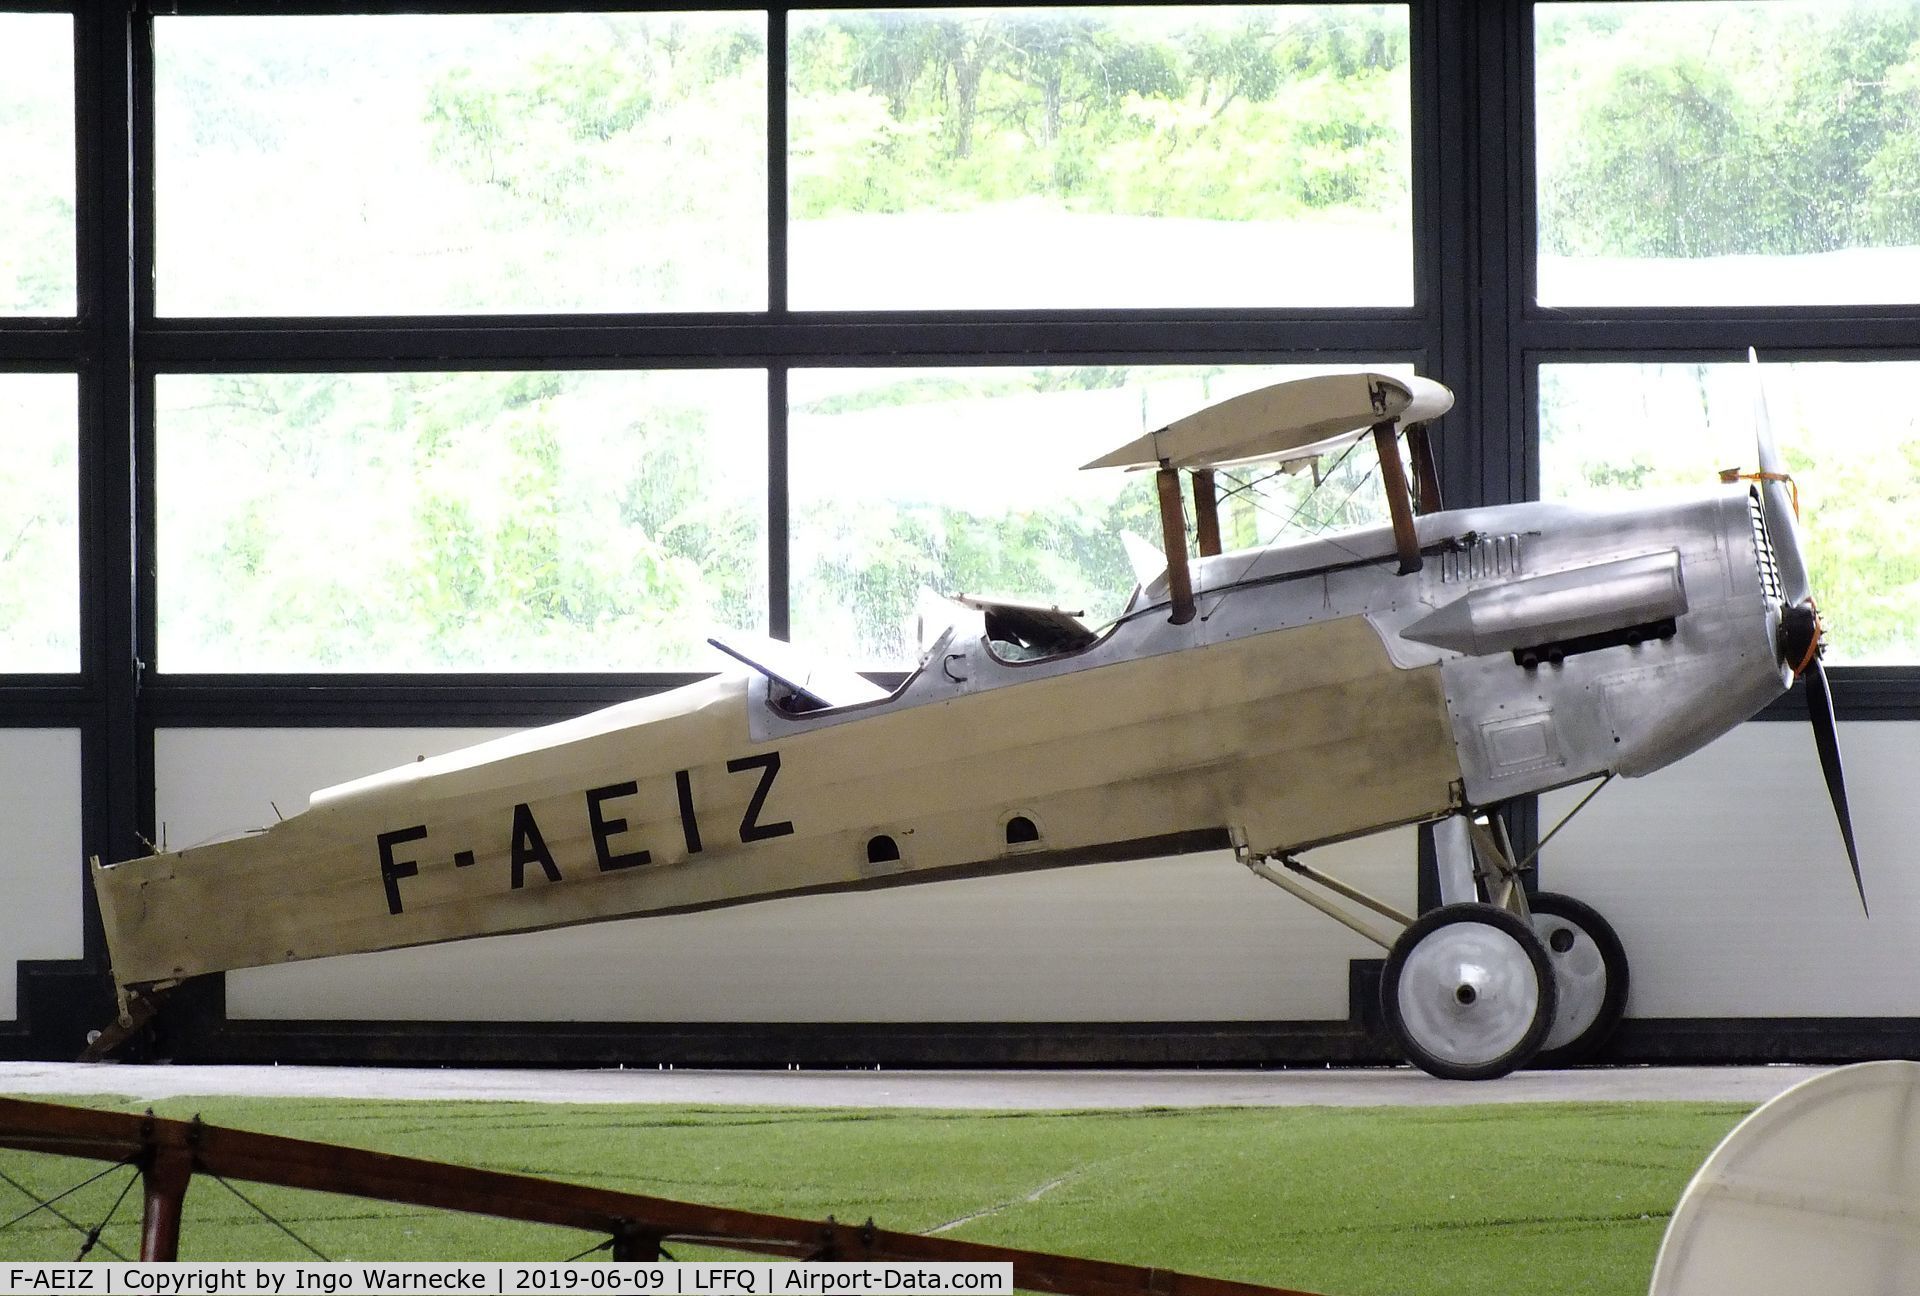 F-AEIZ, Potez 25 Replica C/N Not found F-AEIZ, Potez 25 look-alike (fuselage only, converted from Caudron C.275 Luciole) at the Meeting Aerien 2019, La-Ferte-Alais